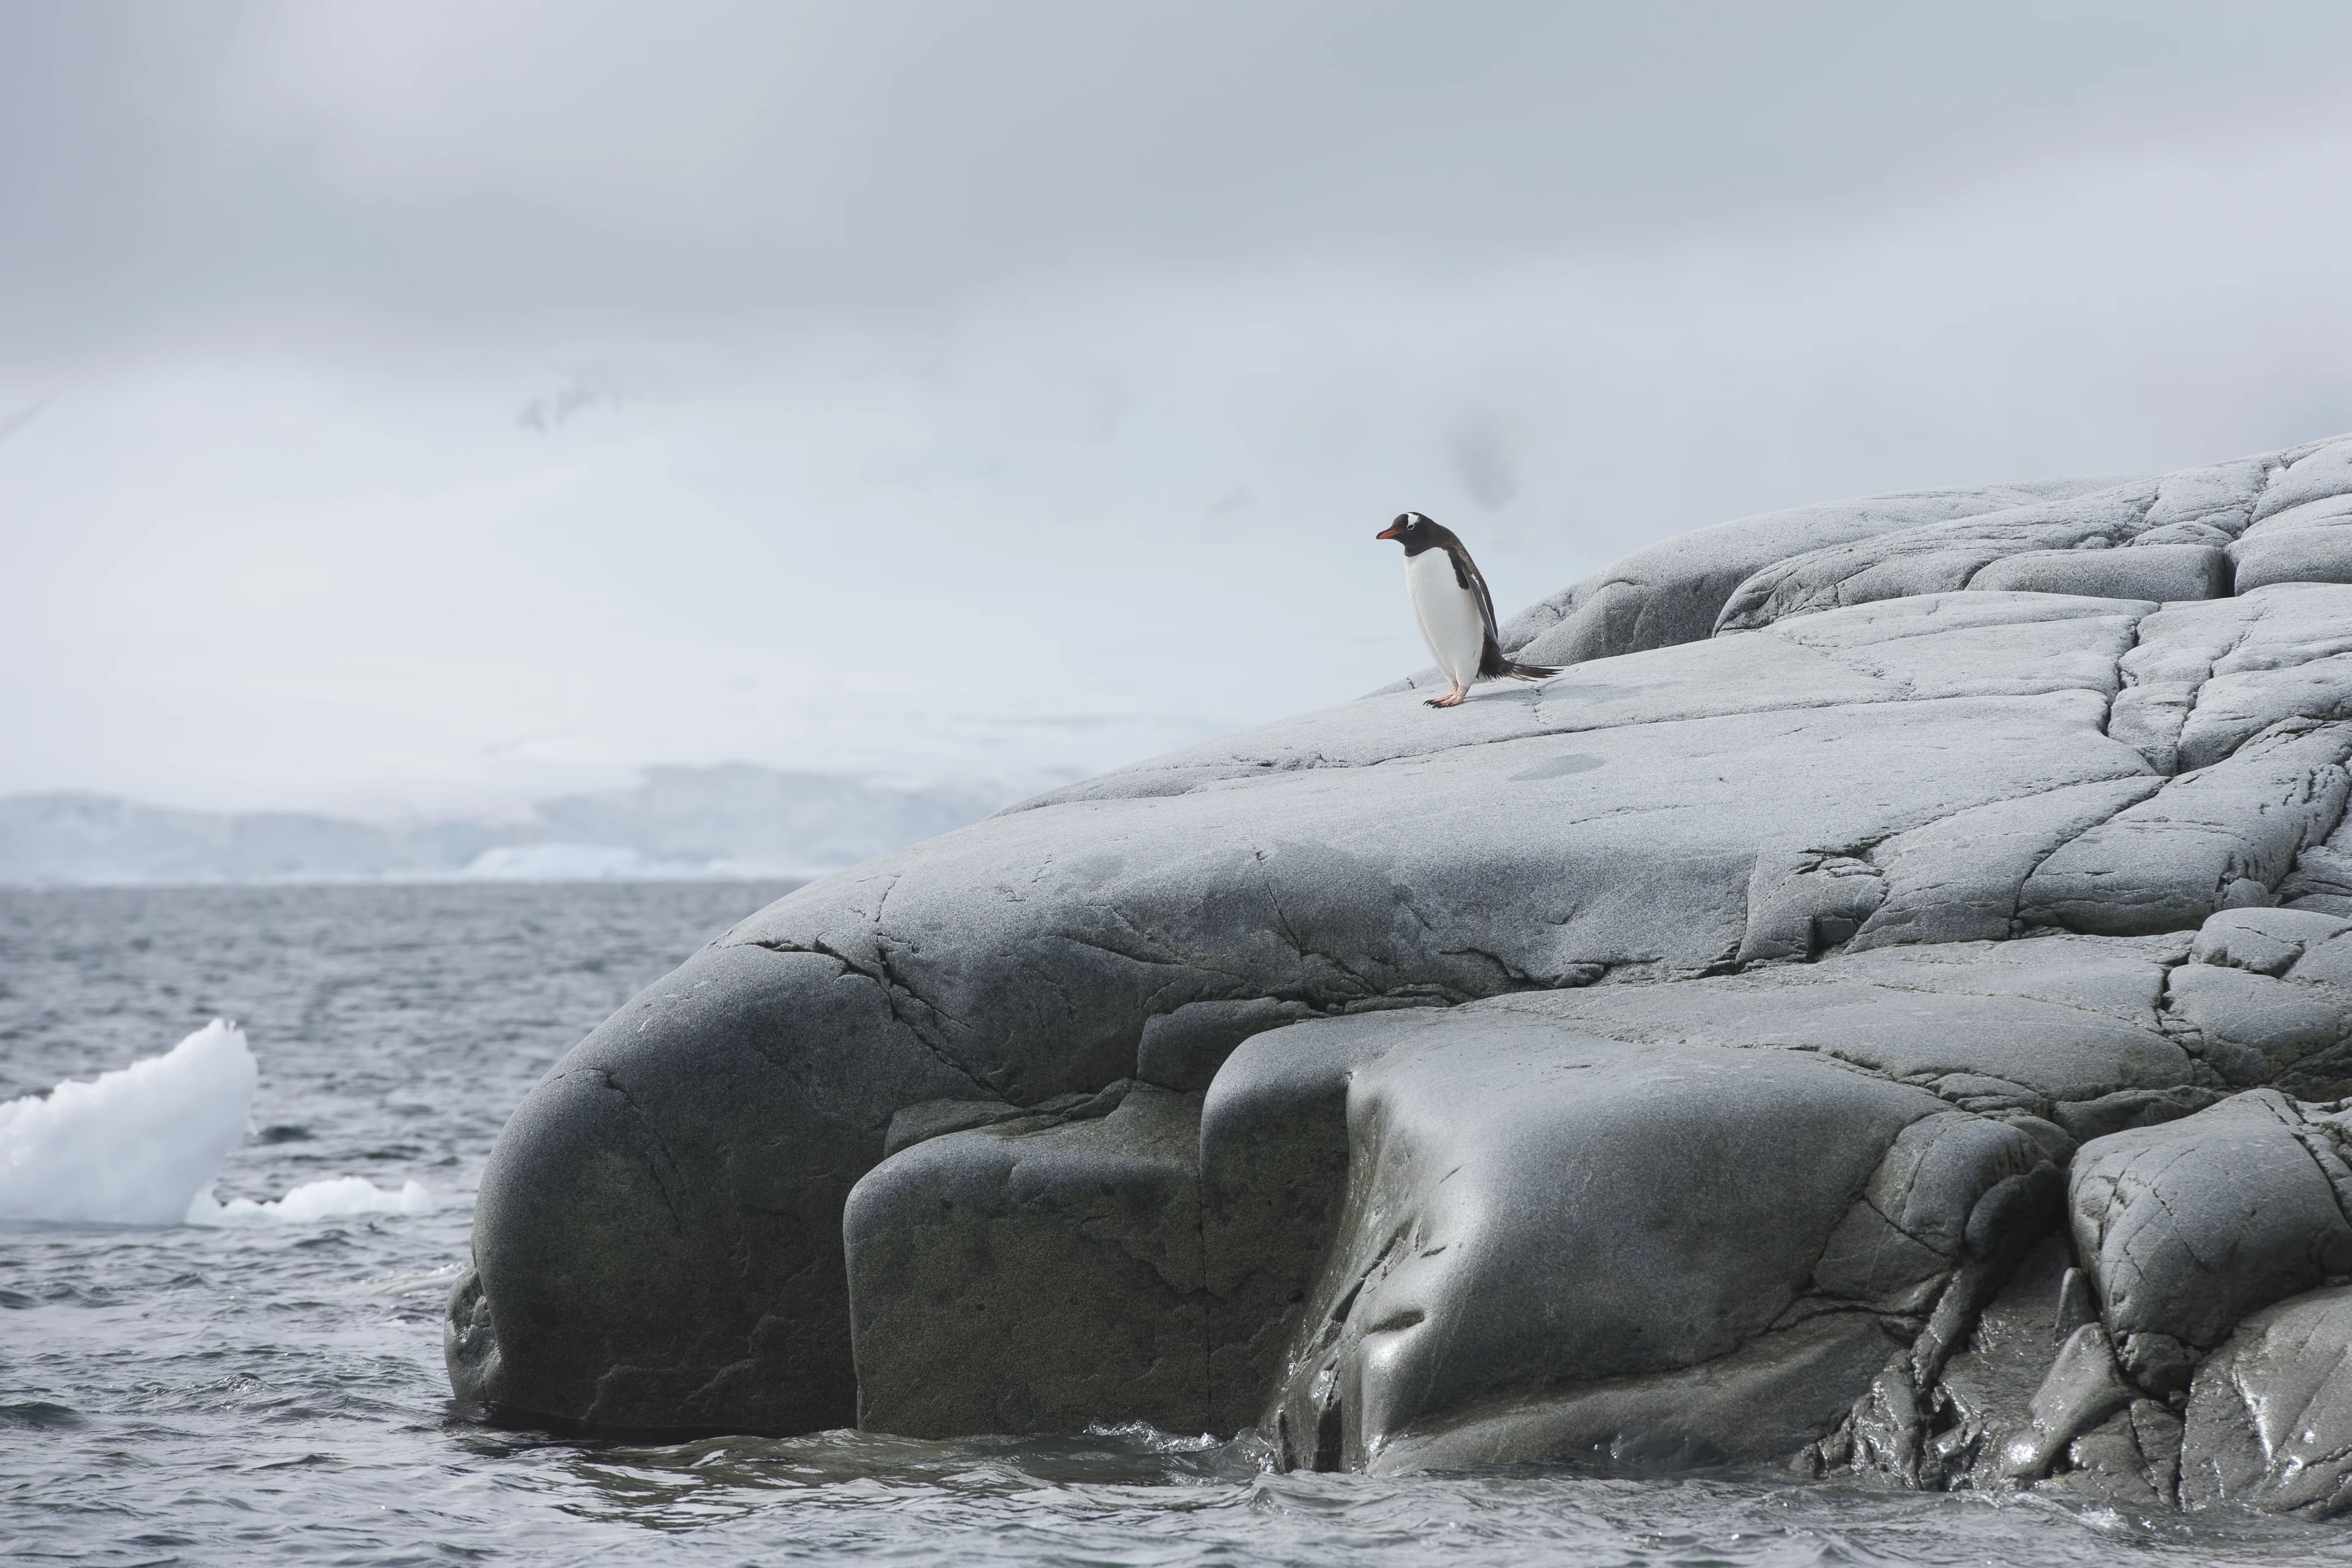 Gentoo Penguin on Damoy Point in Antarctica. Credit: Andreas Kalvig Anderson